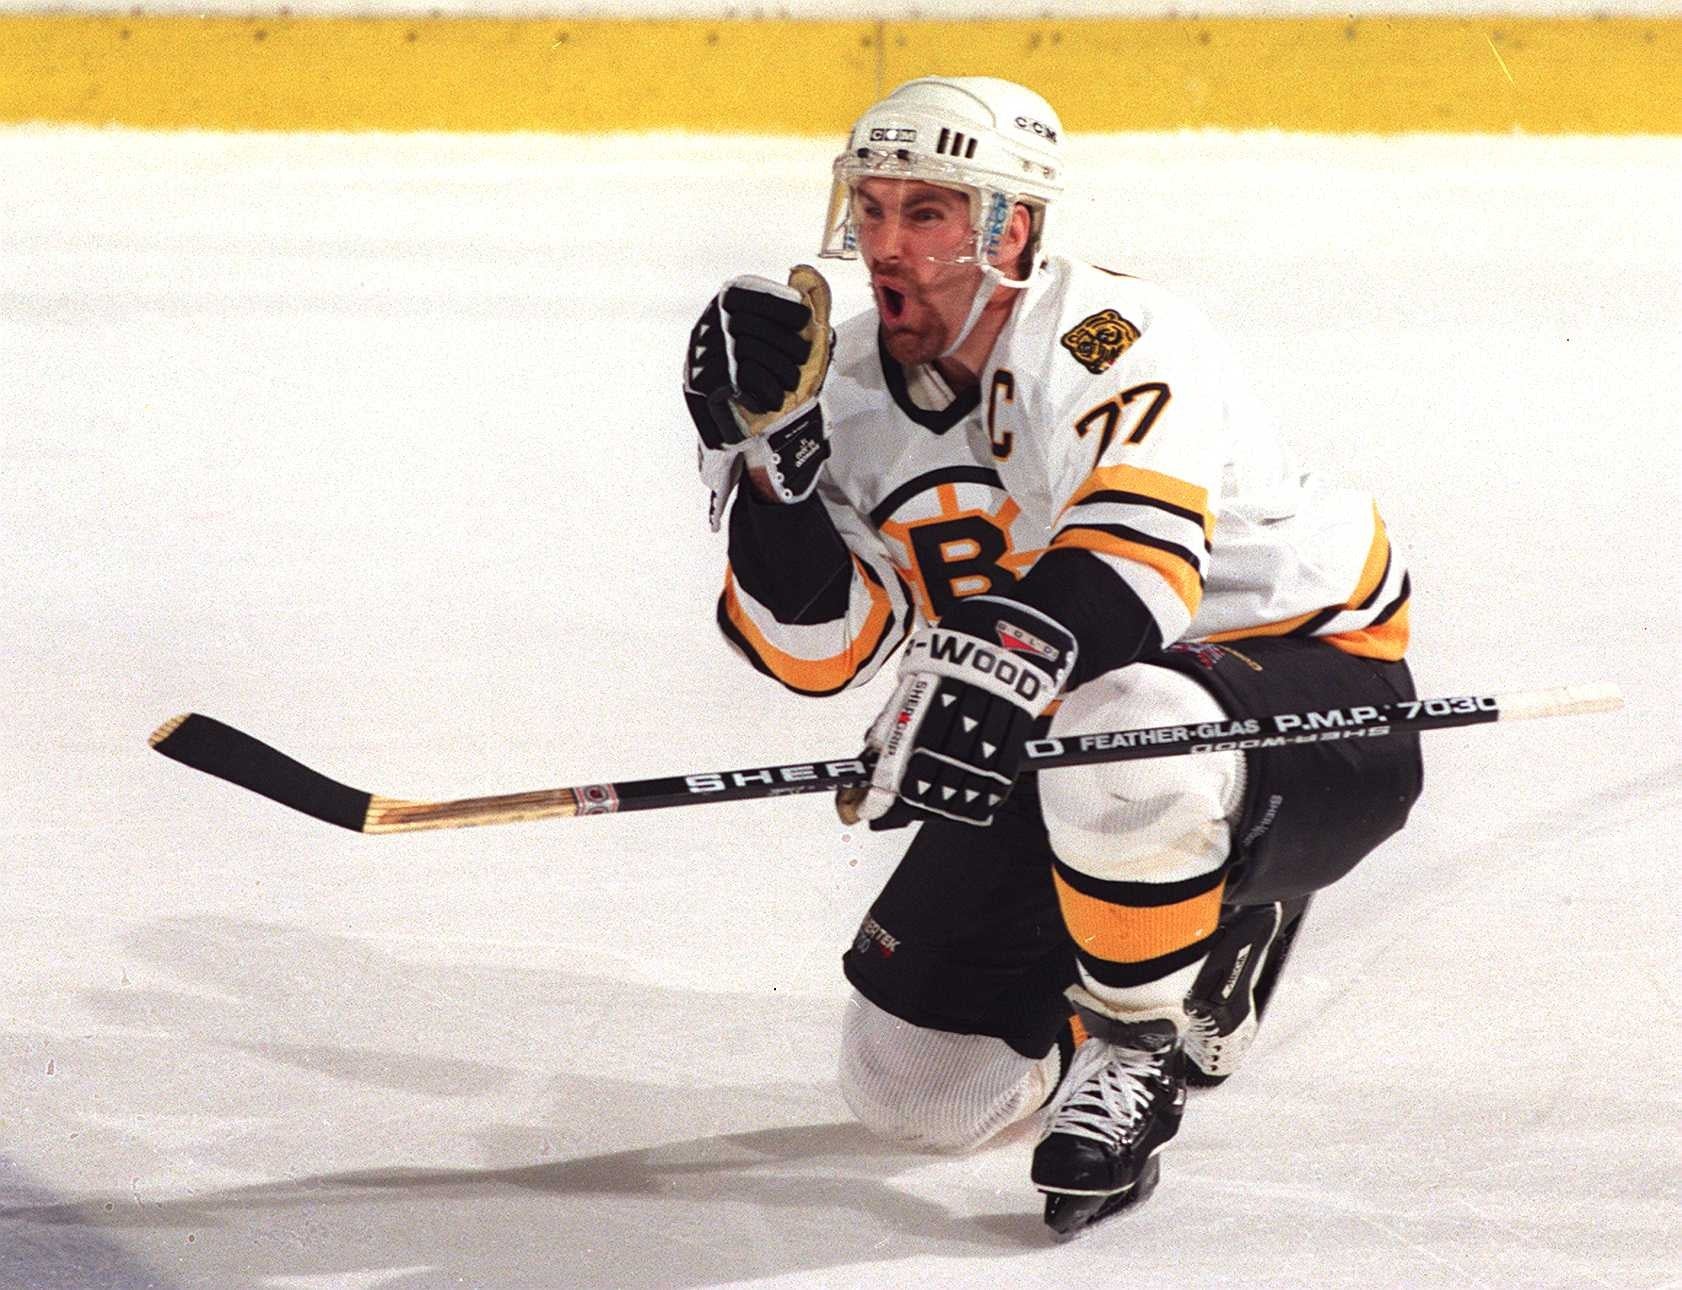 Oral history of the Ray Bourque trade to Avalanche - Colorado Hockey Now